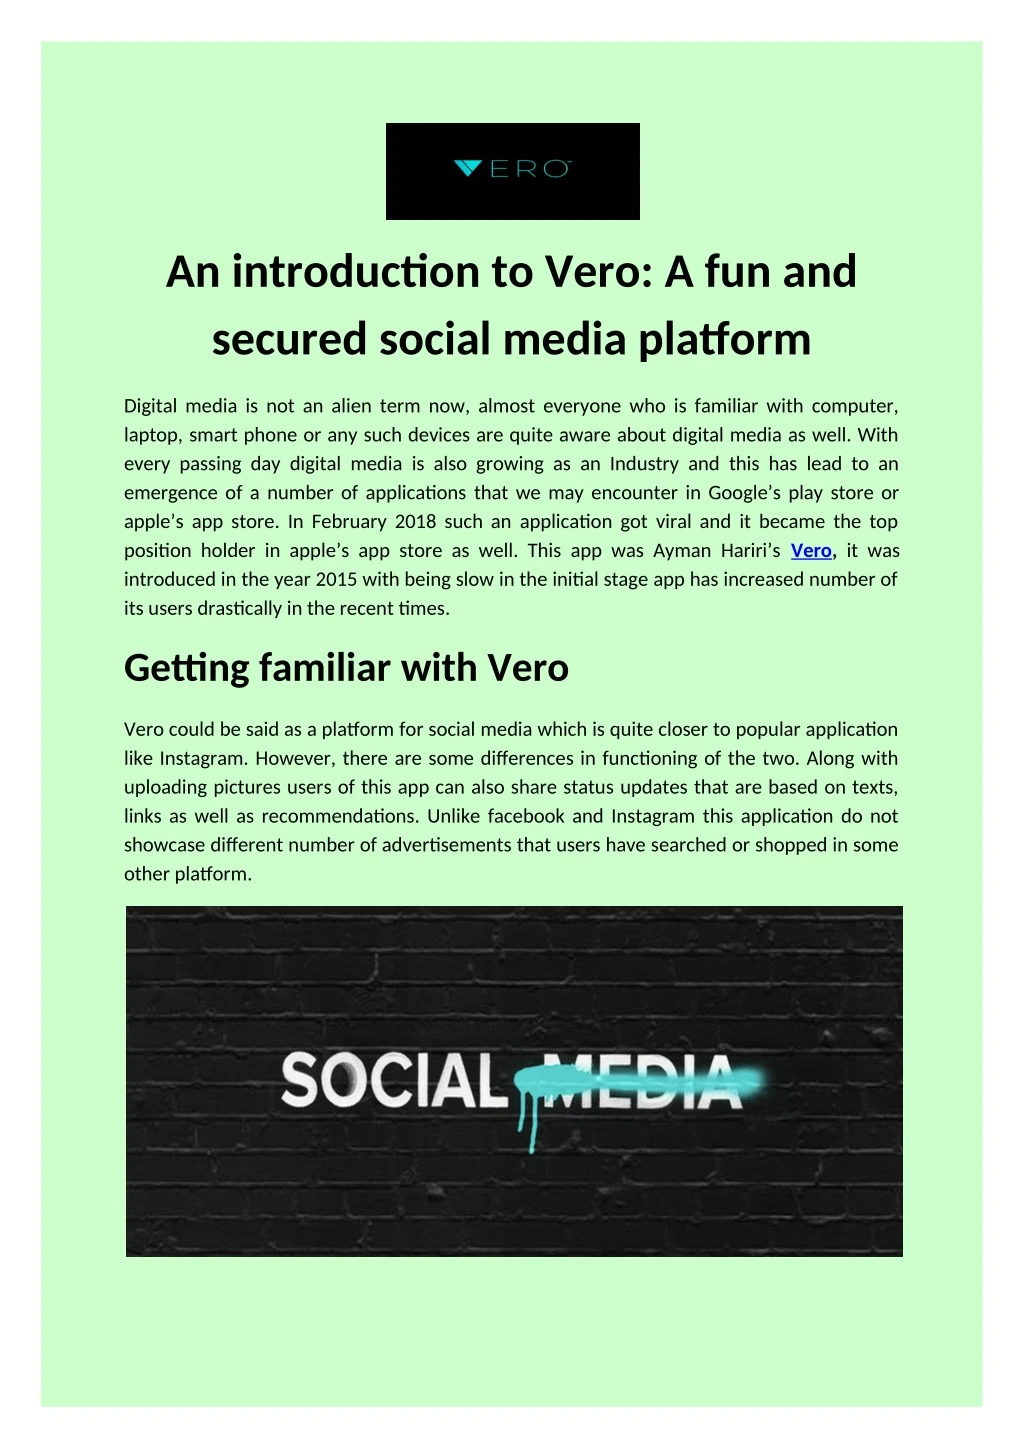 an introduction to vero a fun and secured social